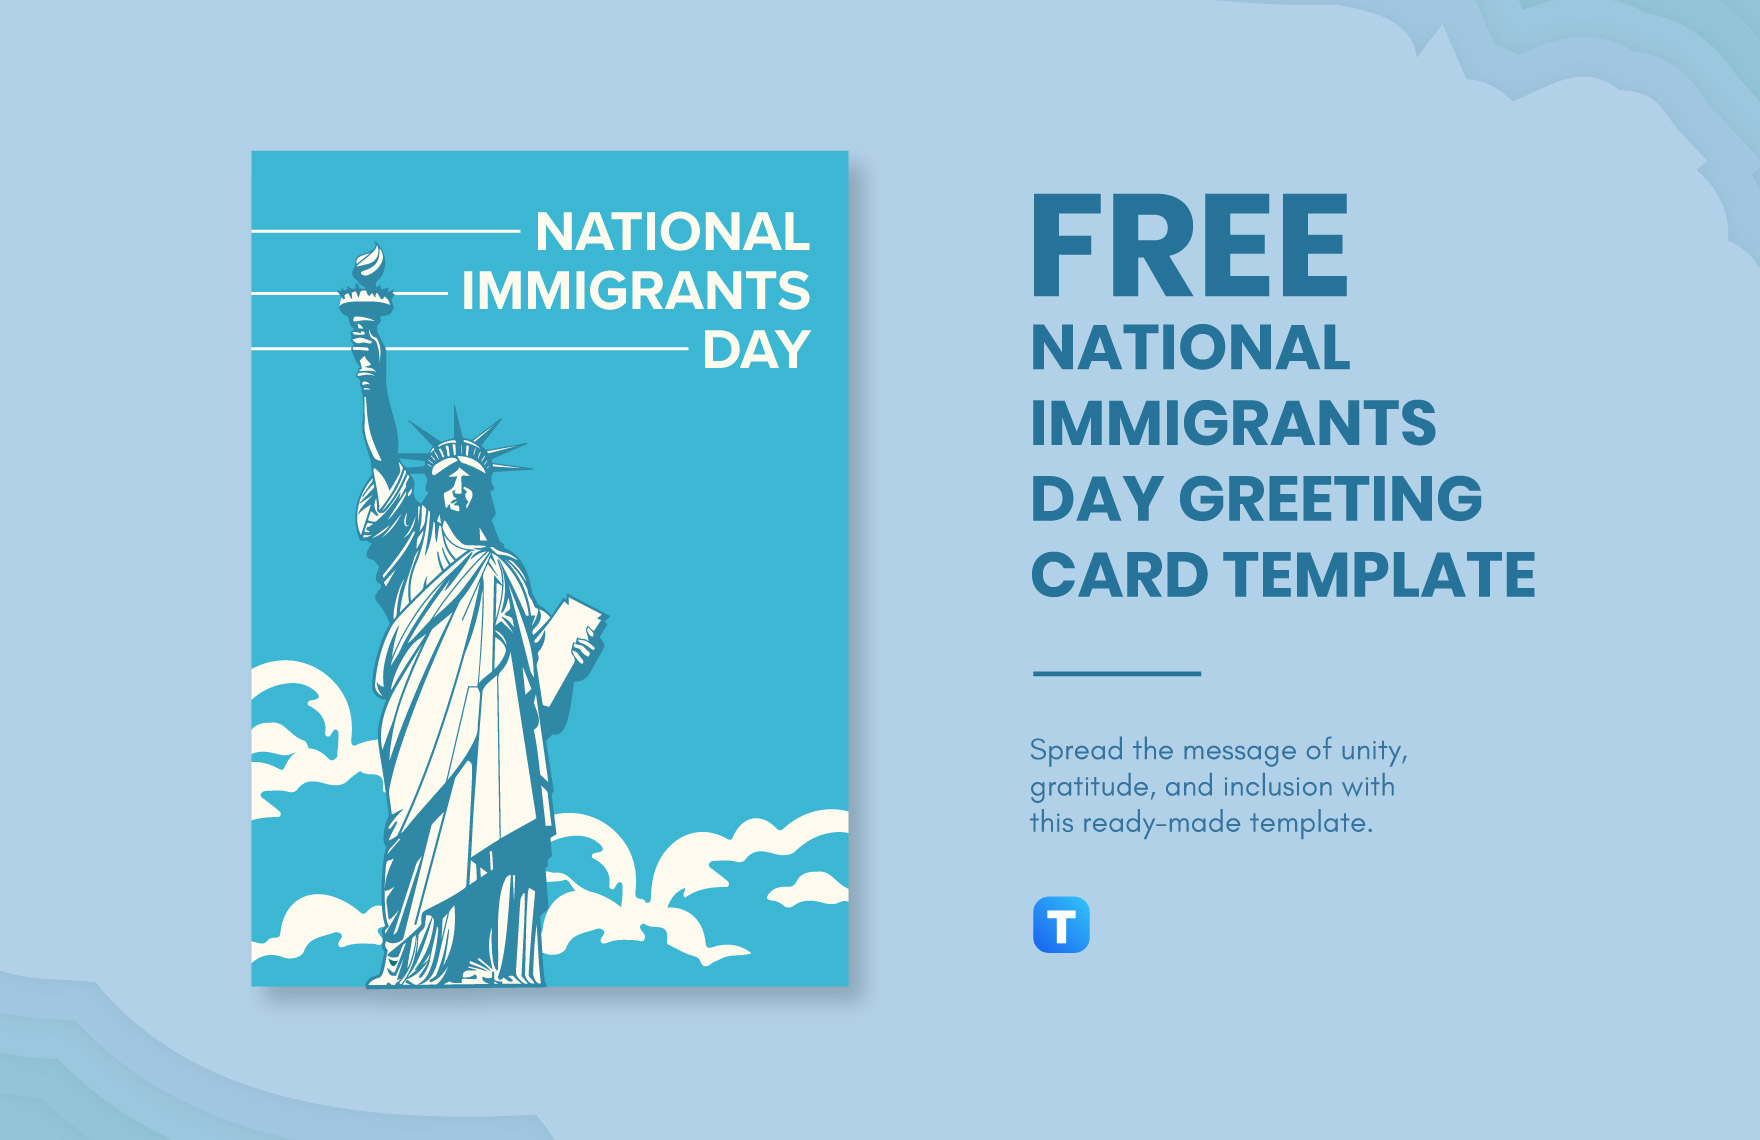 National Immigrants Day Greeting Card Template